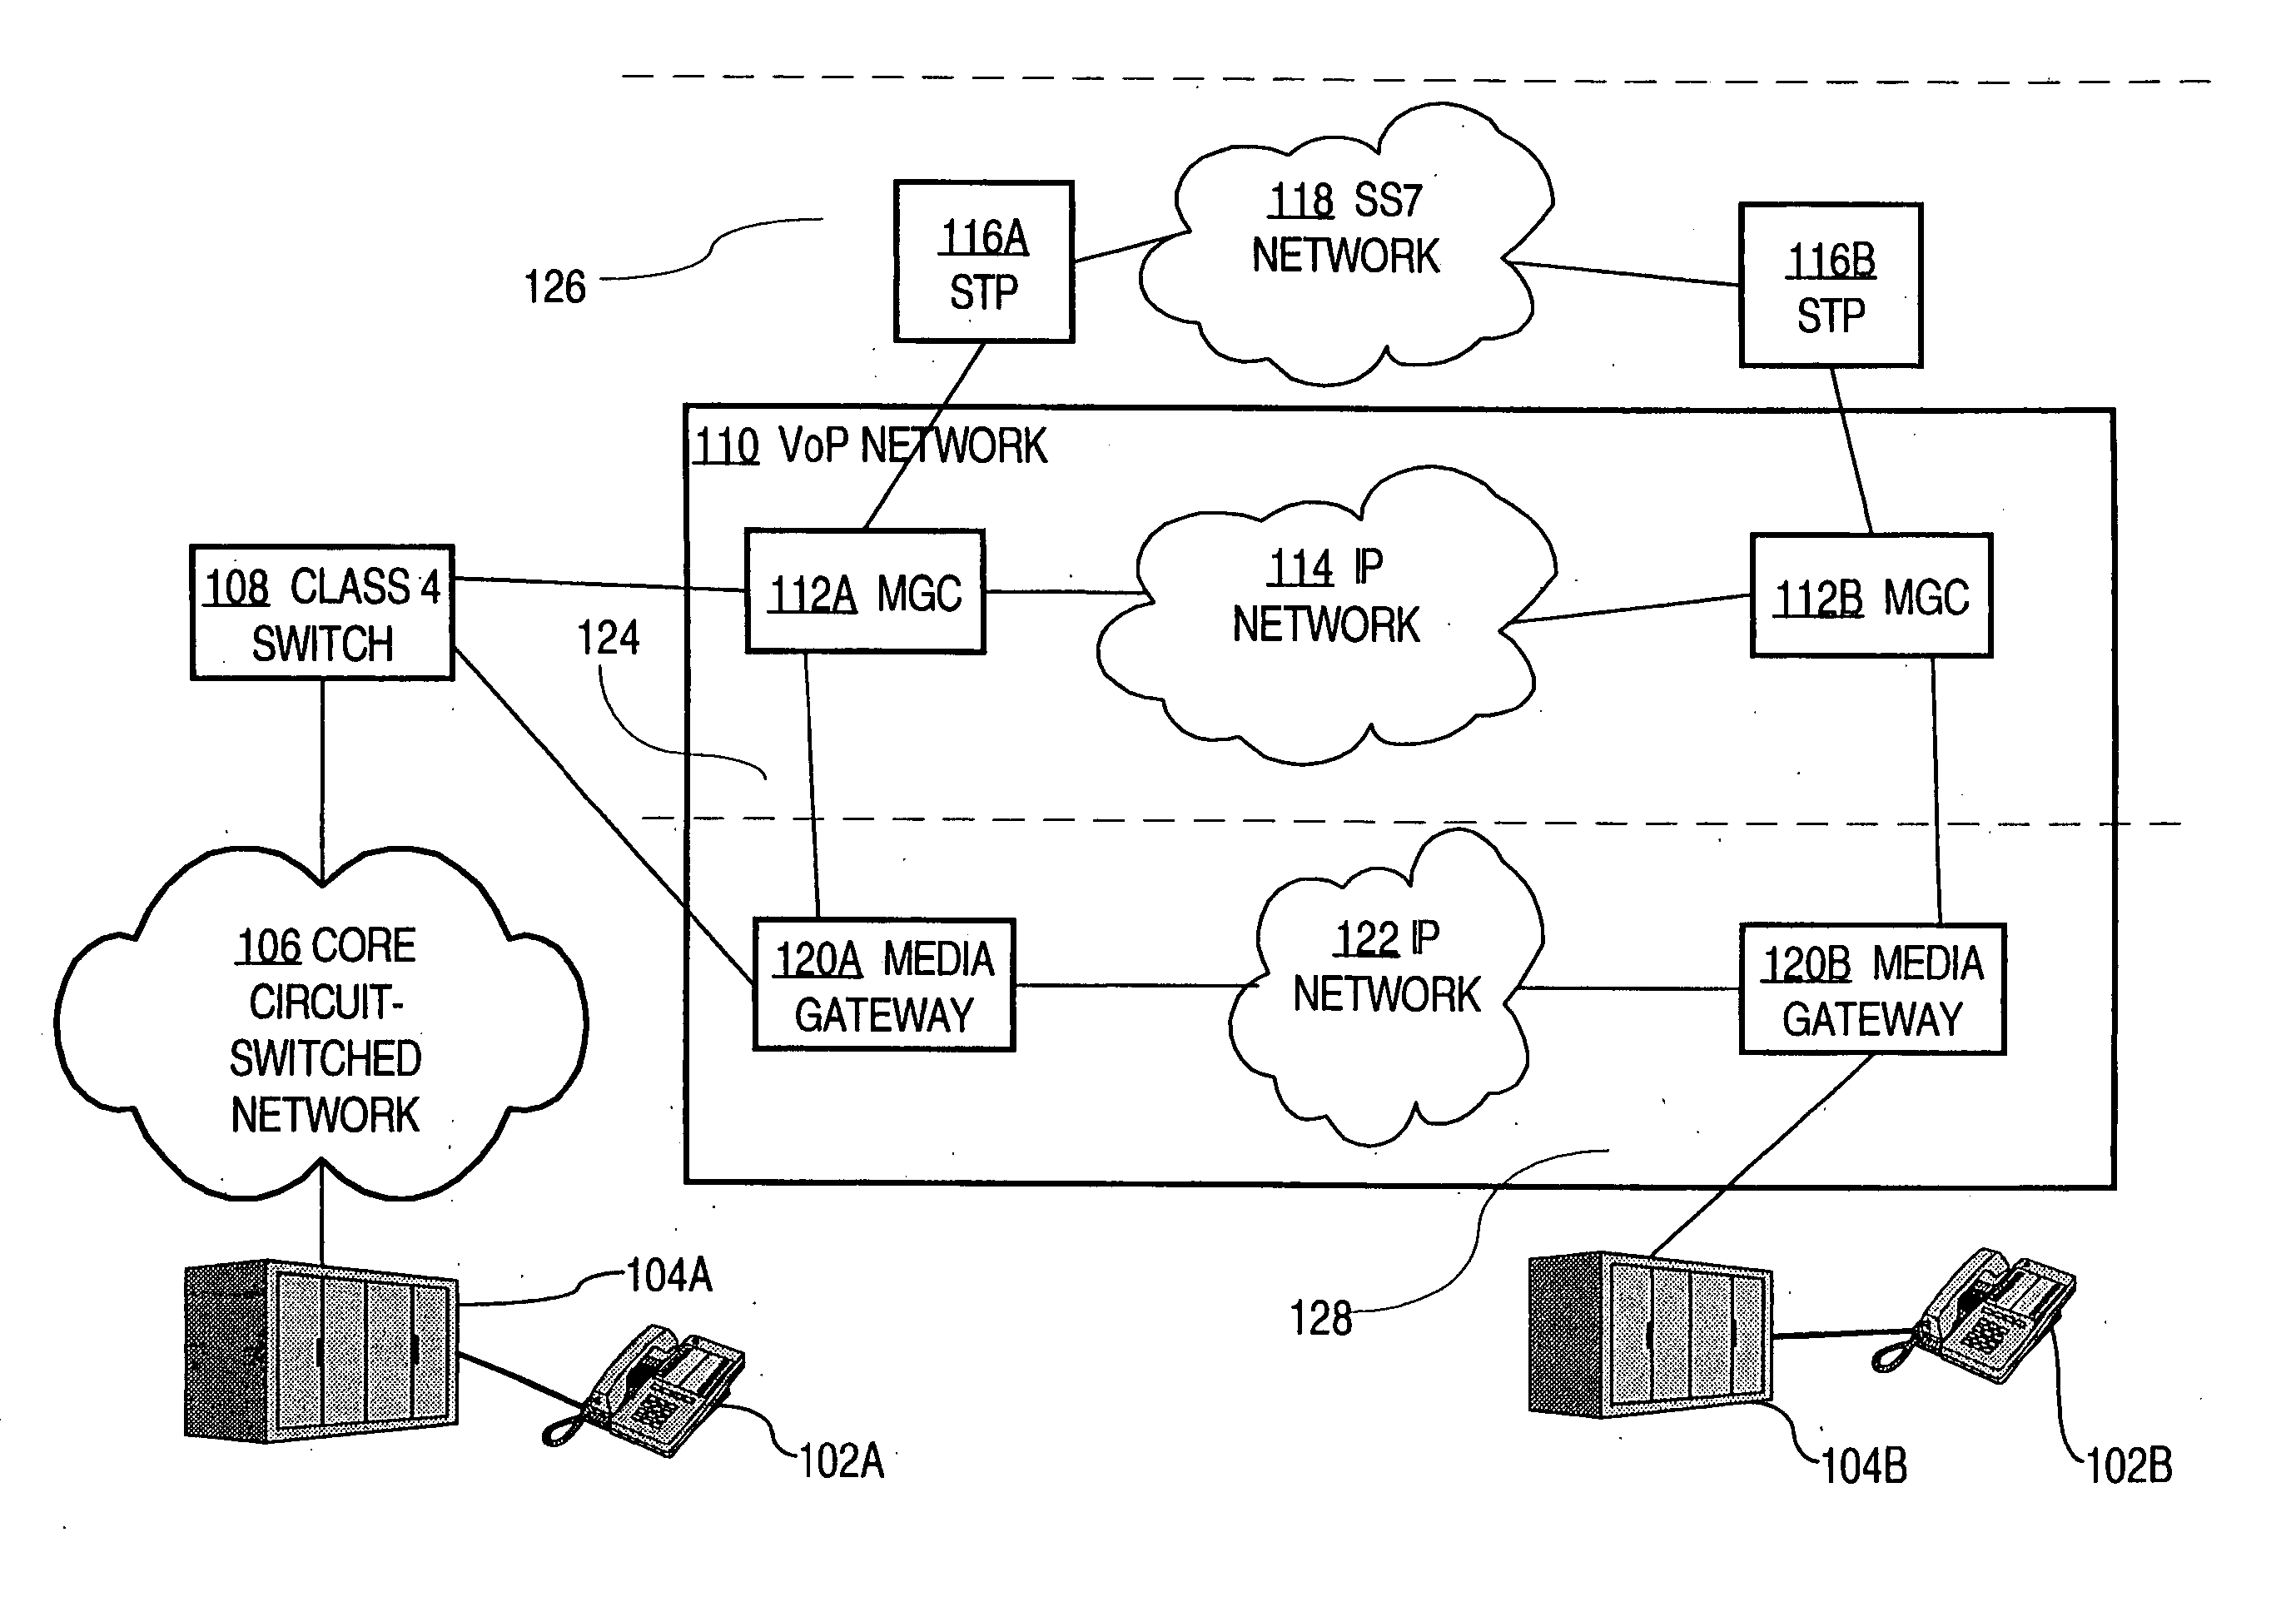 Managing packet voice networks using a virtual switch approach